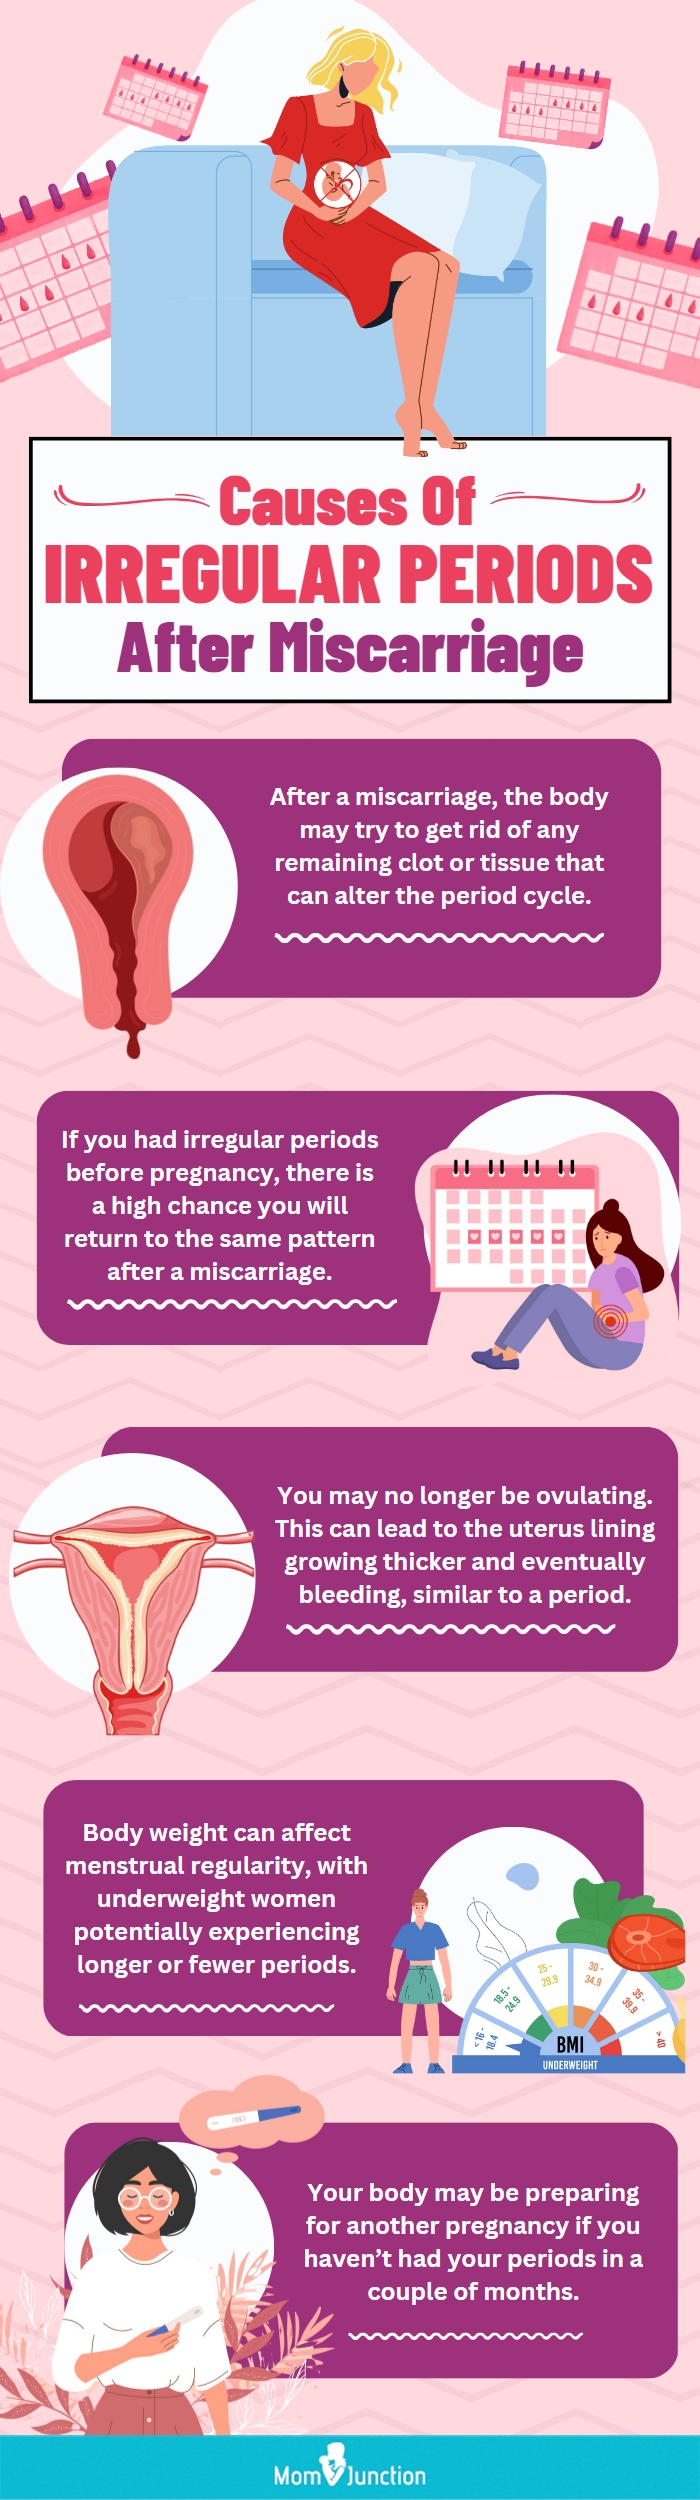 causes of irregular periods after miscarriage (infographic)